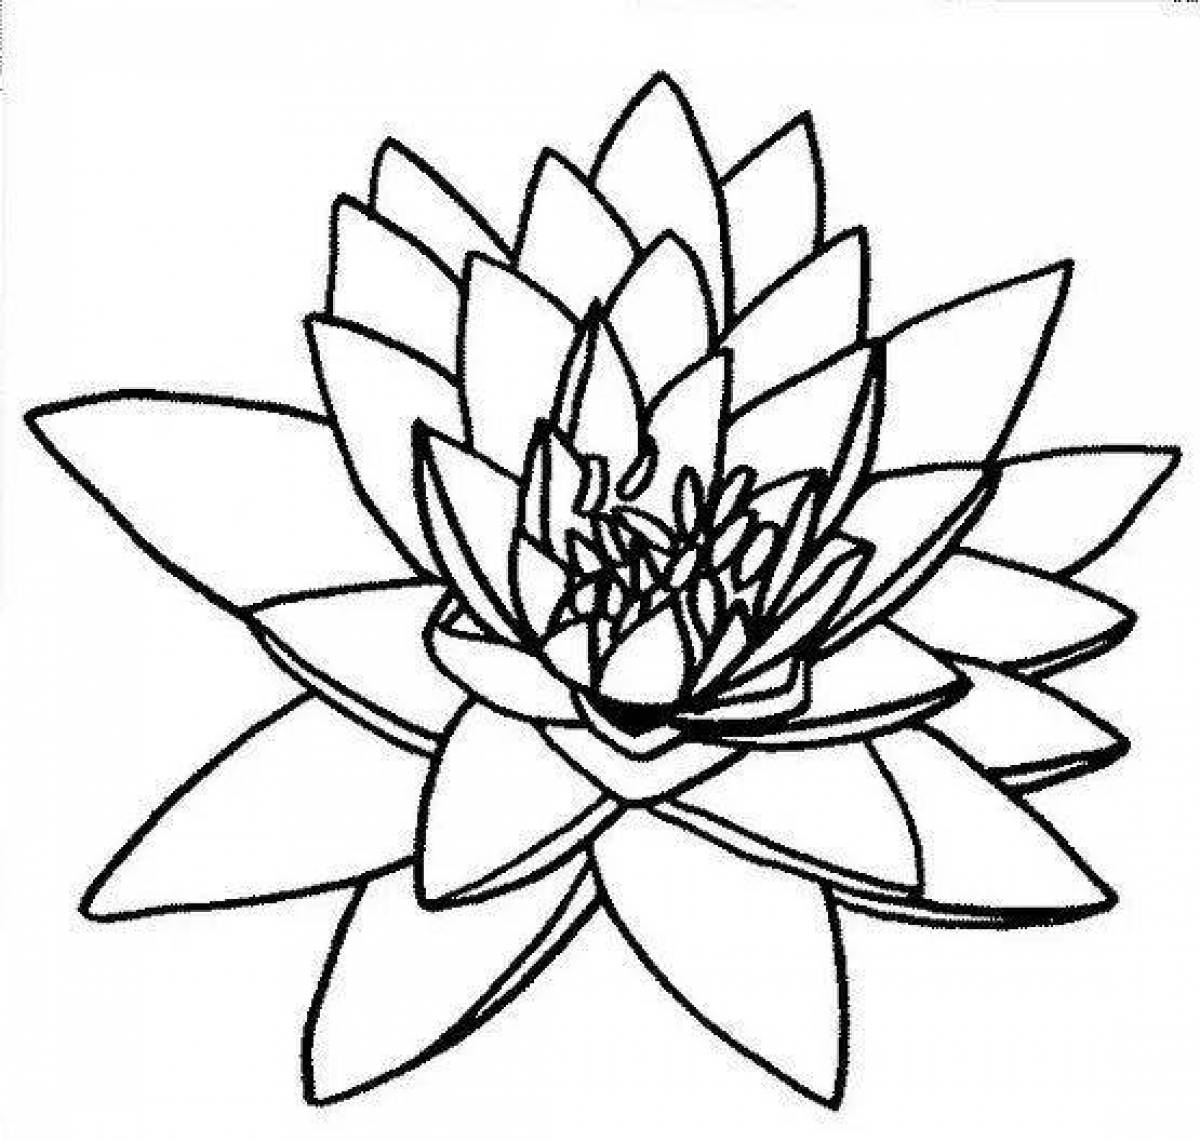 Cleaned stone flower coloring page